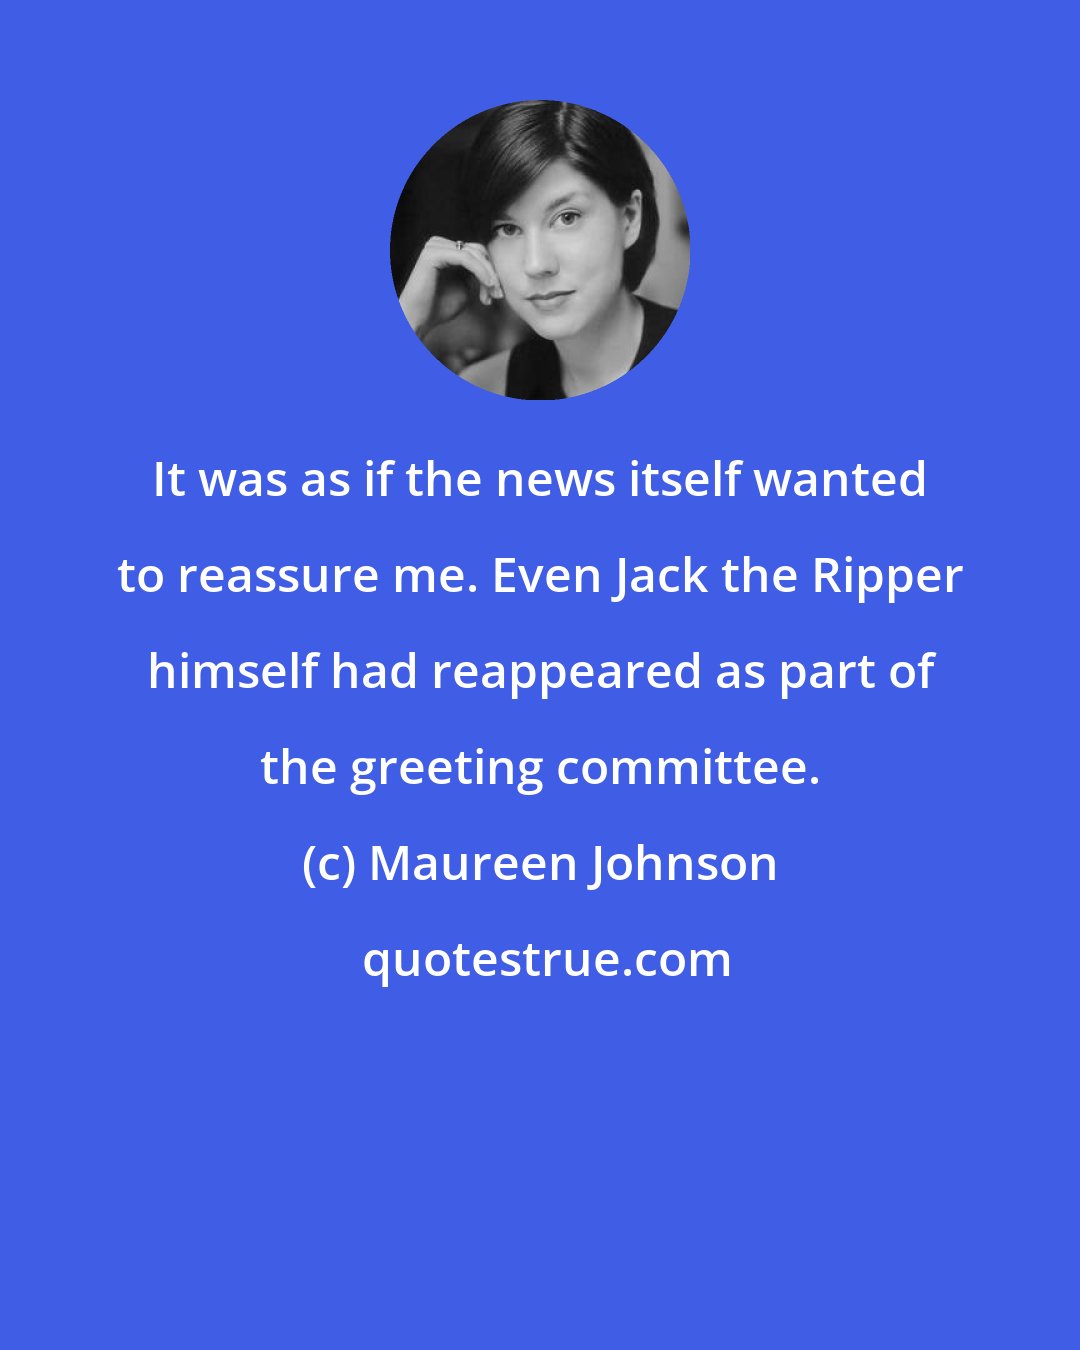 Maureen Johnson: It was as if the news itself wanted to reassure me. Even Jack the Ripper himself had reappeared as part of the greeting committee.